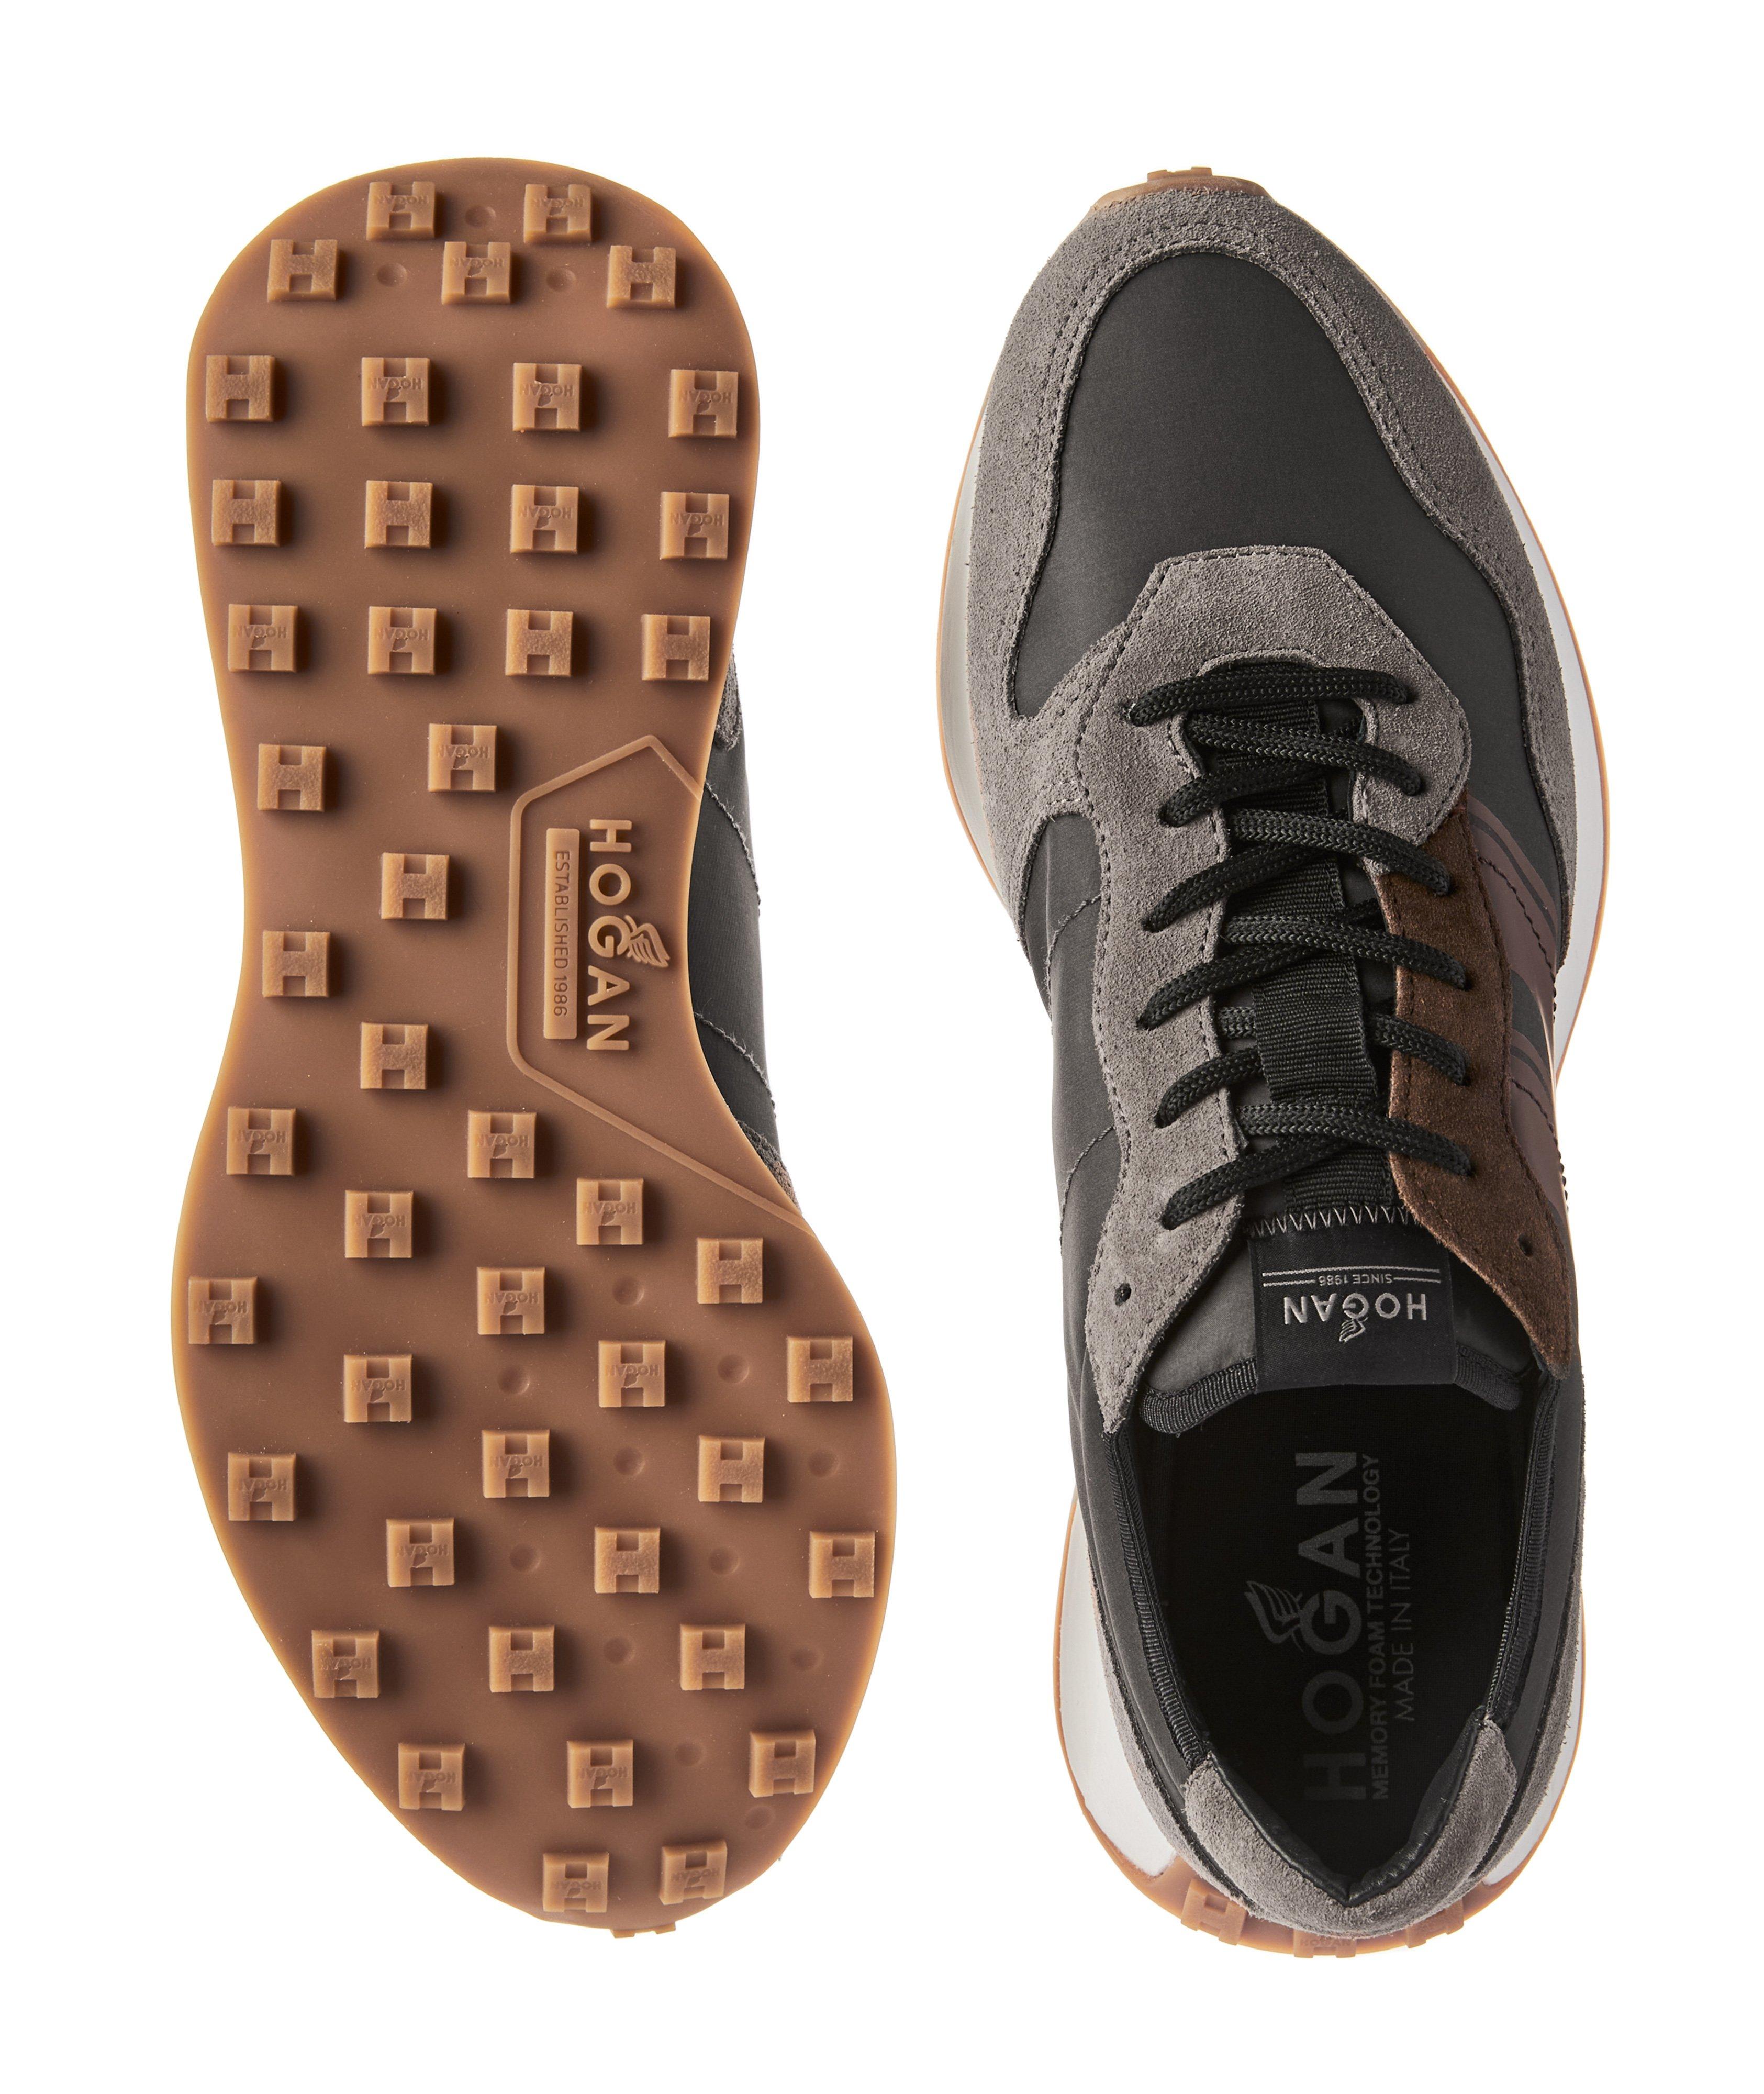 H601 Suede Sneakers image 2